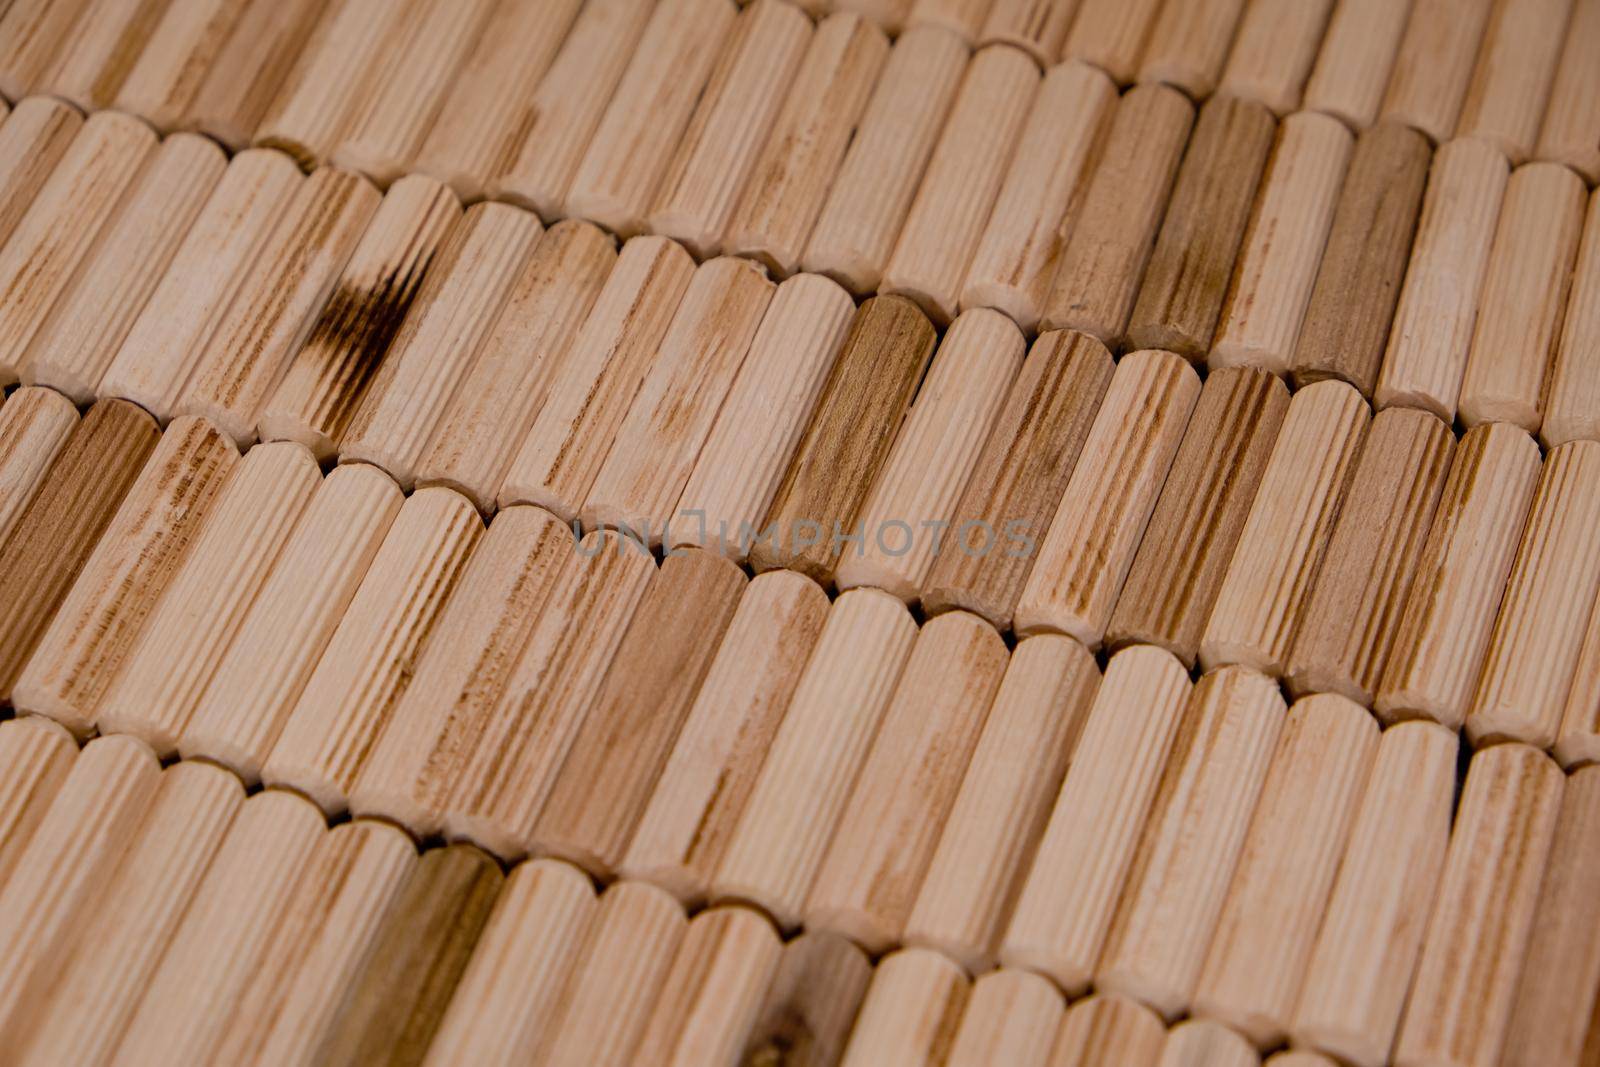 View of a grouping of wooden dowels as background. Close-up. Selective focus.